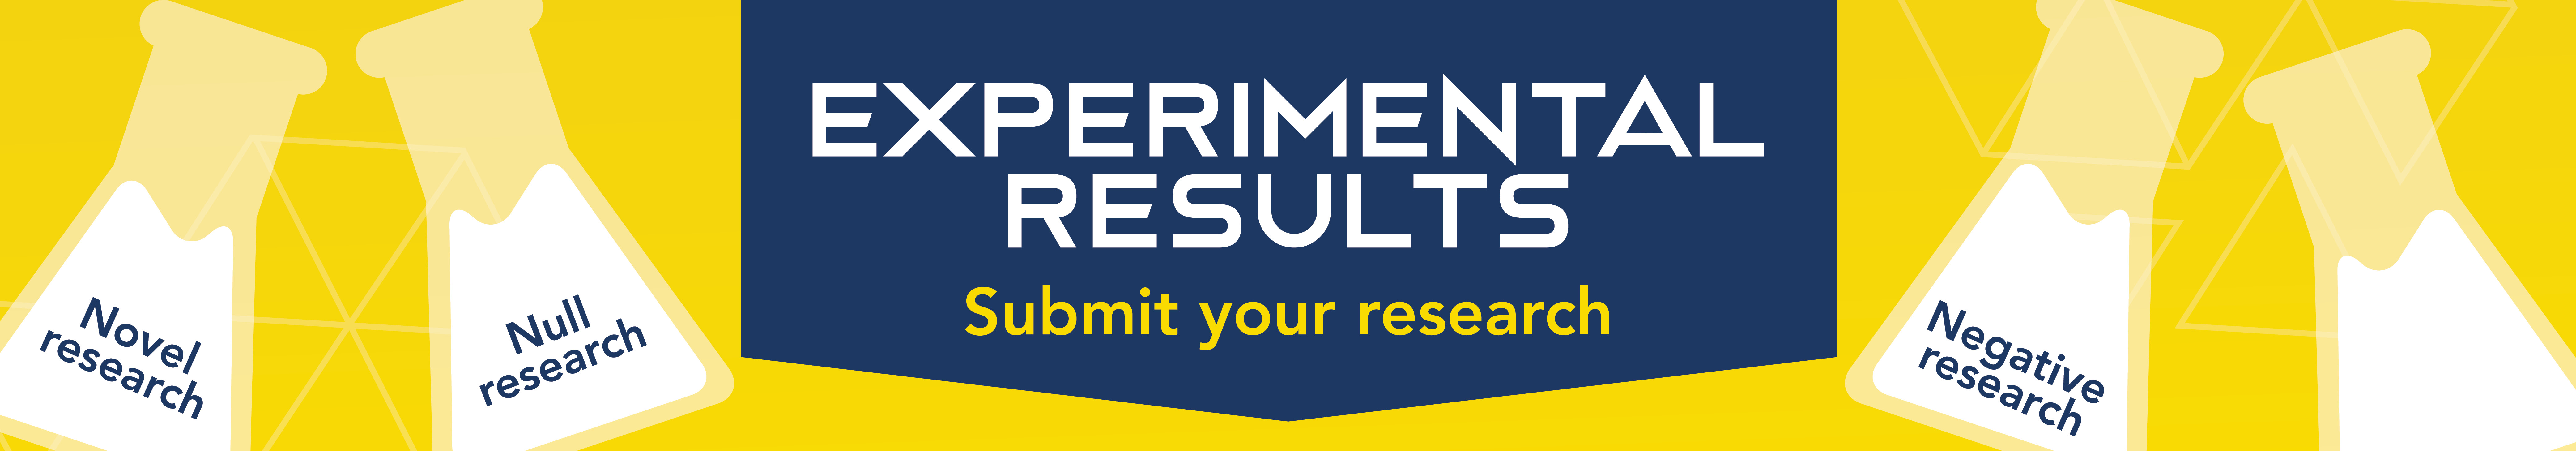 Experimental Results: Submit your research